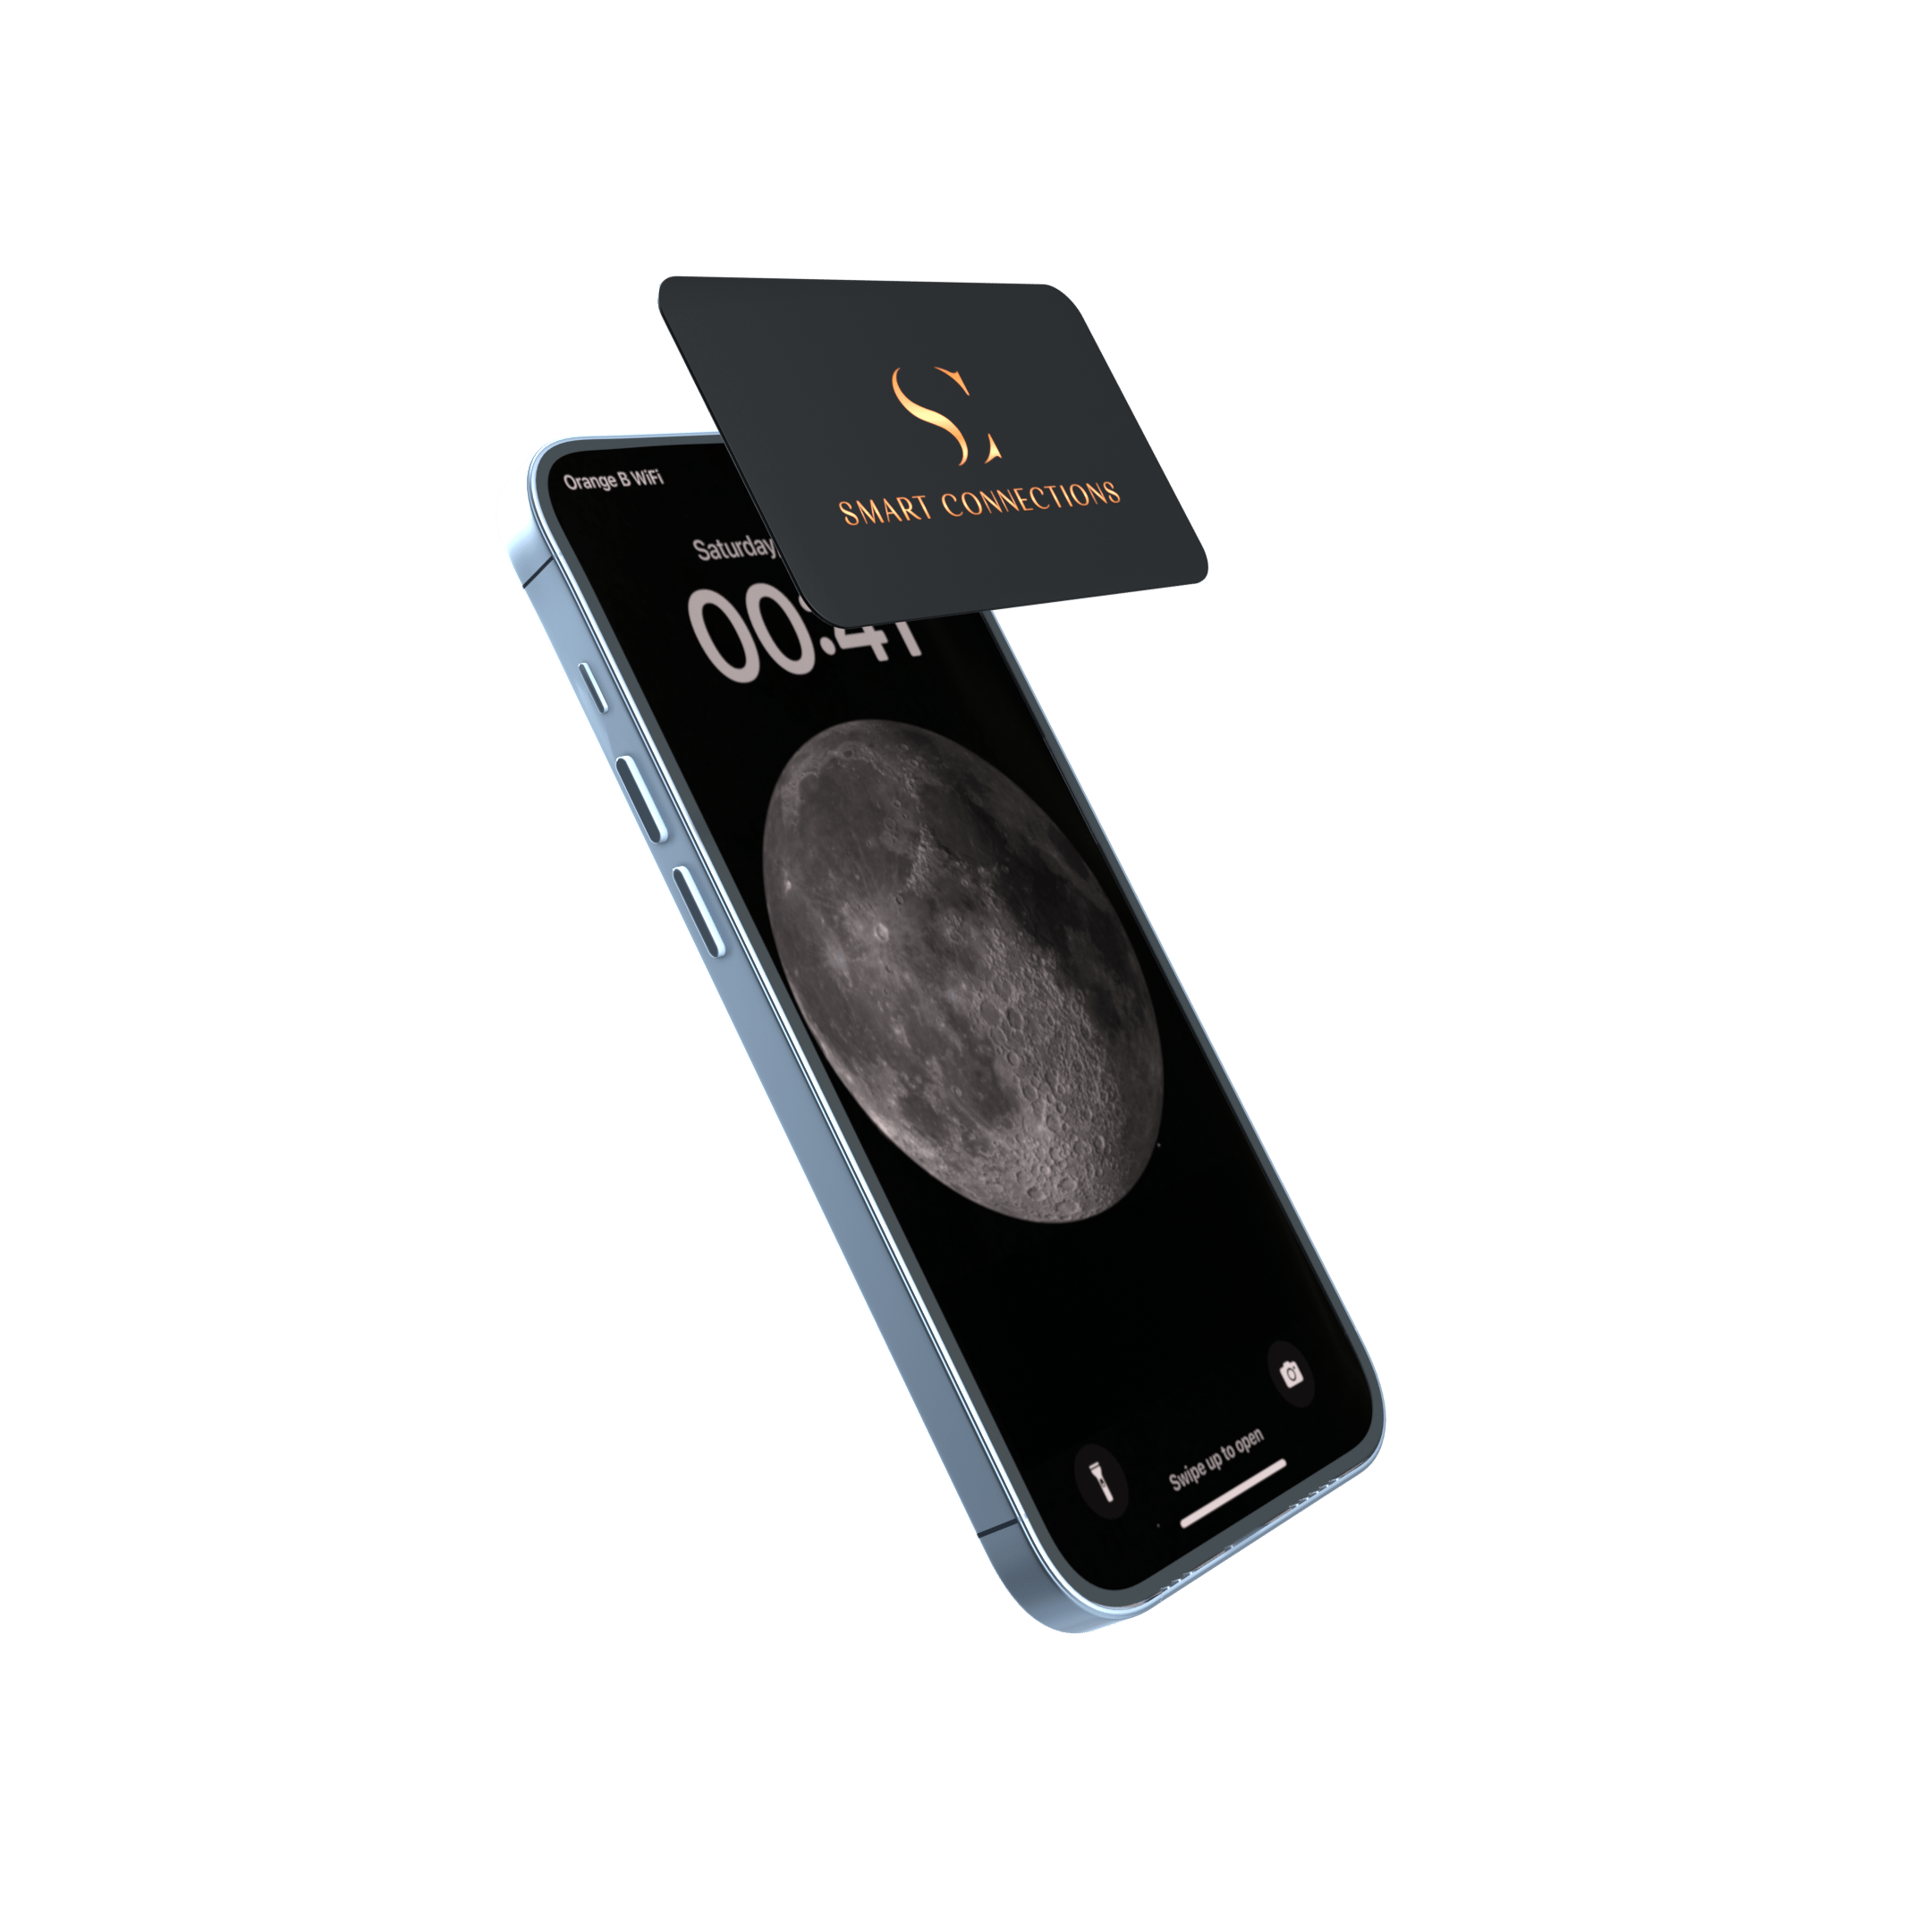 Smartphone with business card